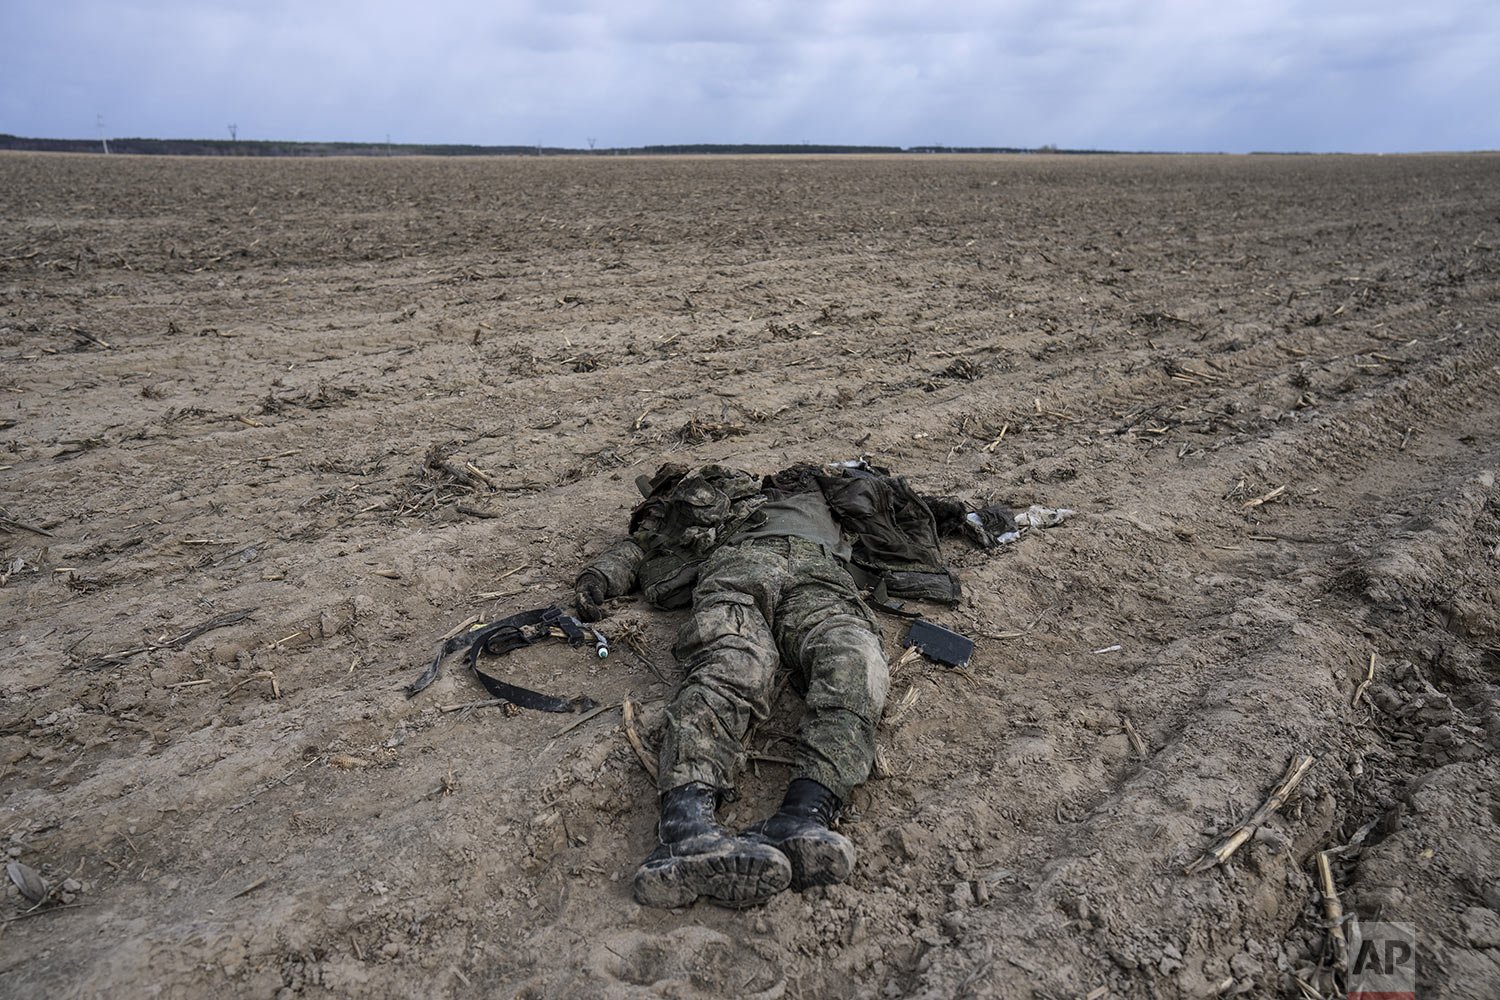  A Russian soldier killed during combats against the Ukrainian army lies in a corn field in Sytnyaky on the outskirts of Kyiv, Ukraine, Sunday, March 27, 2022. (AP Photo/Rodrigo Abd) 